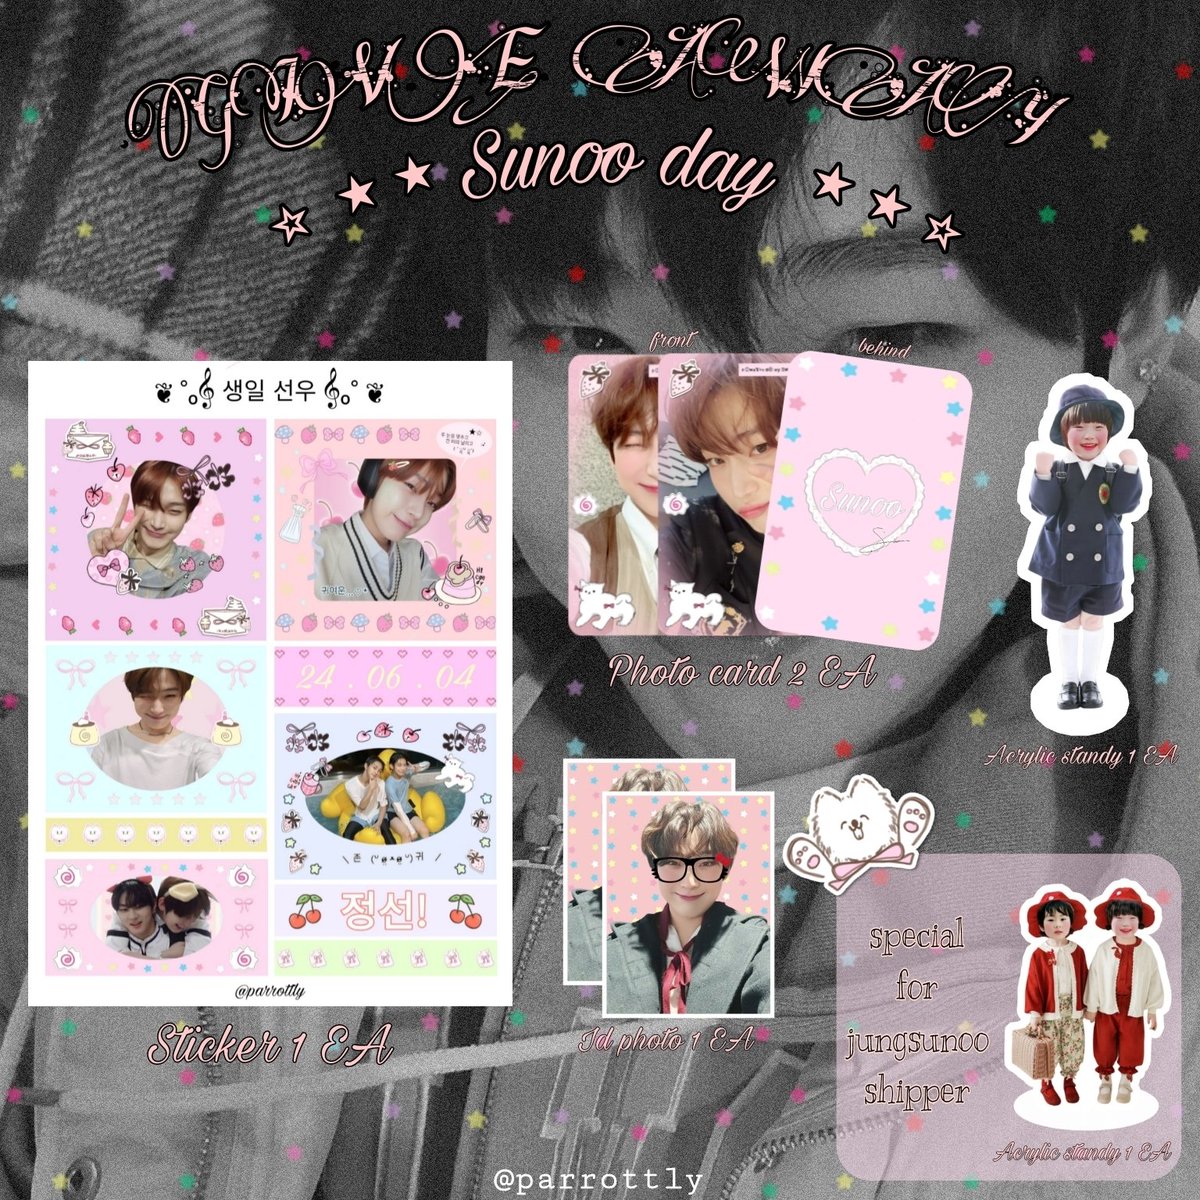 𐙚⭒please kindly rt⭒𐙚 
give away - sunoo birthday 

❤︎ [ 5 sets ] 🐬♥️❕
— sticker  1 ea 
 — id photo 1 ea
 — acrylic standy 1ea
 — photo card 2 ea
— special for jungsunoo shipper only ! ! !

gg forms : june 23 , 2024
time : 20;00
shipping 40฿ bath

#happysunooday #sunoo